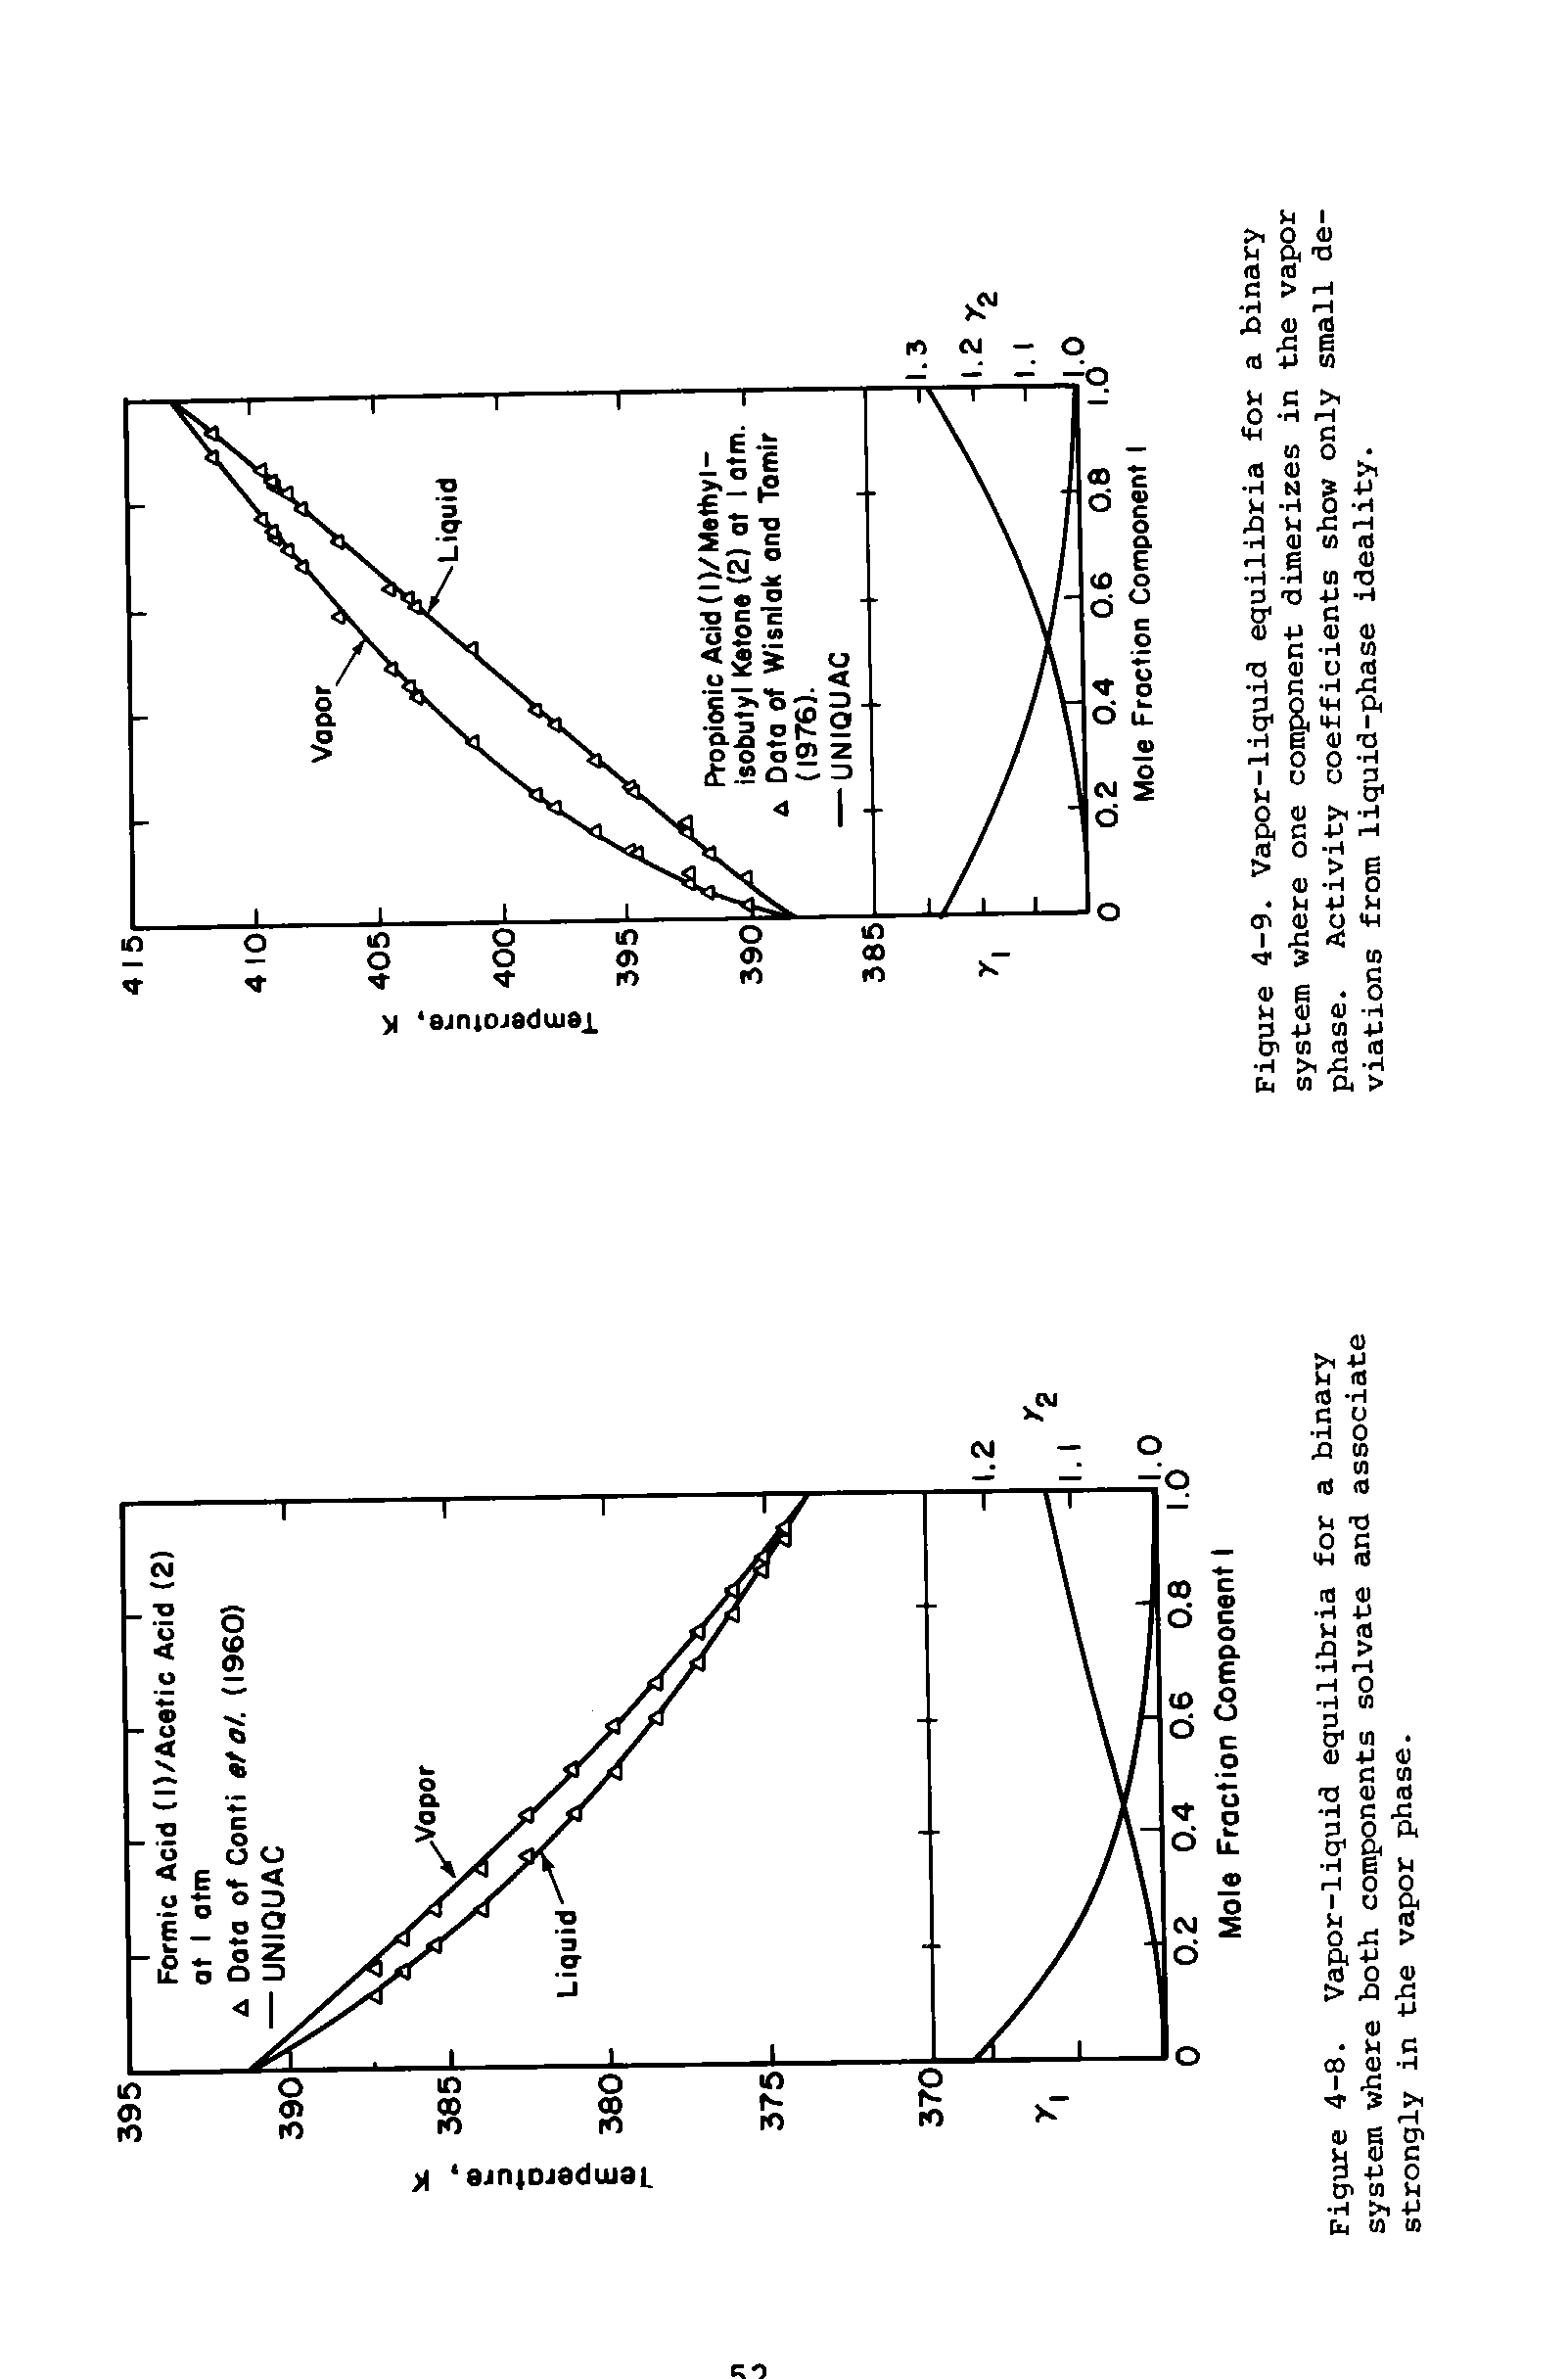 Figure 4-8. Vapor-liquid equilibria for a binary system where both components solvate and associate strongly in the vapor phase.